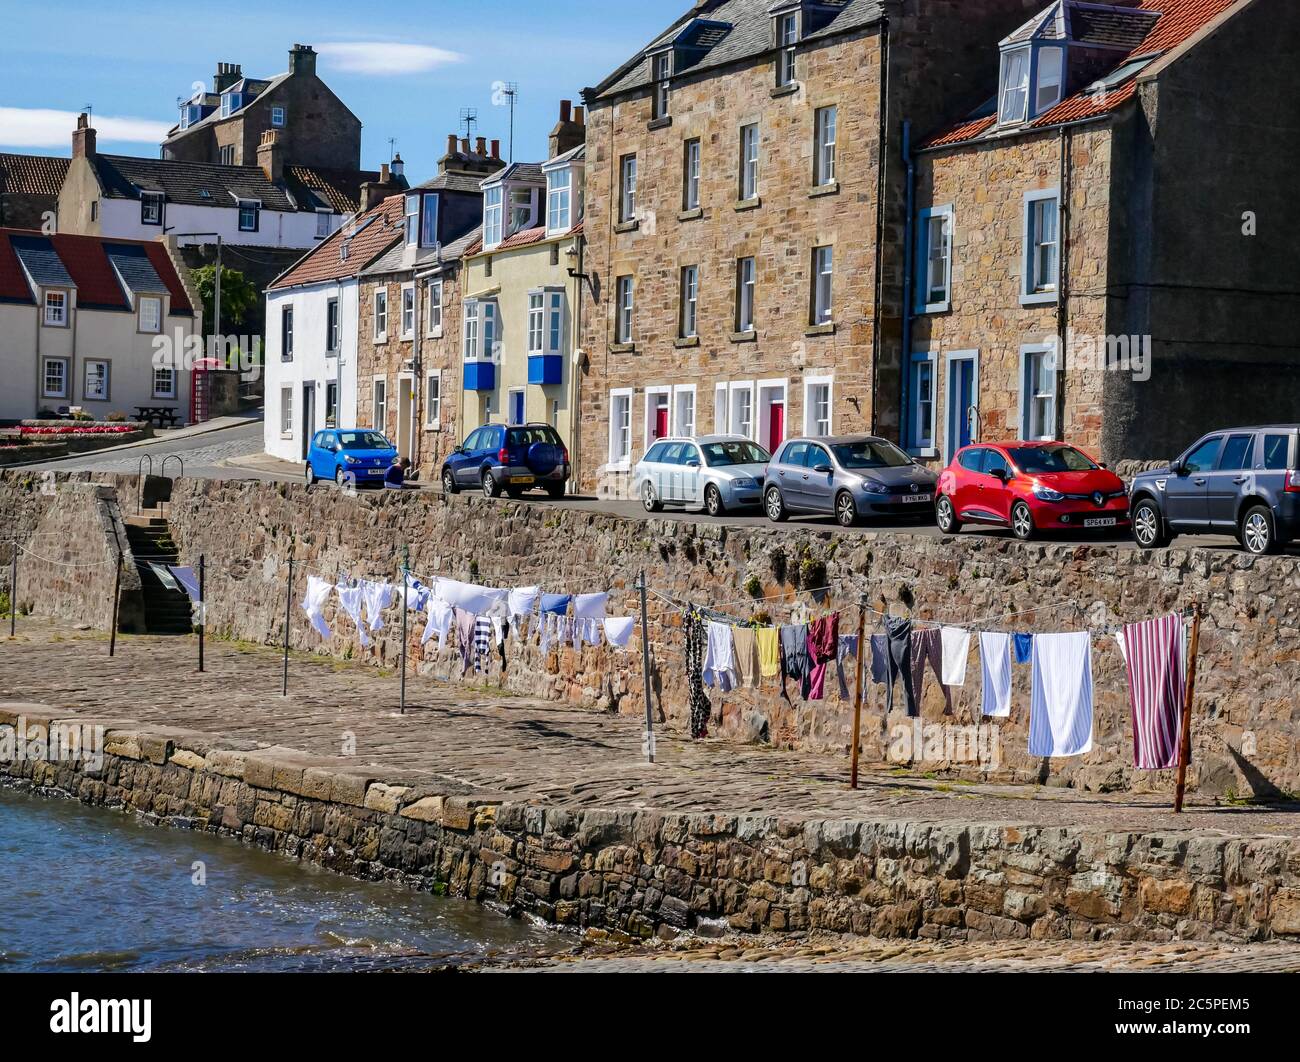 Washing hanging to dry on communal clotheslines in harbour, Anstruther, Fife, Scotland, UK Stock Photo